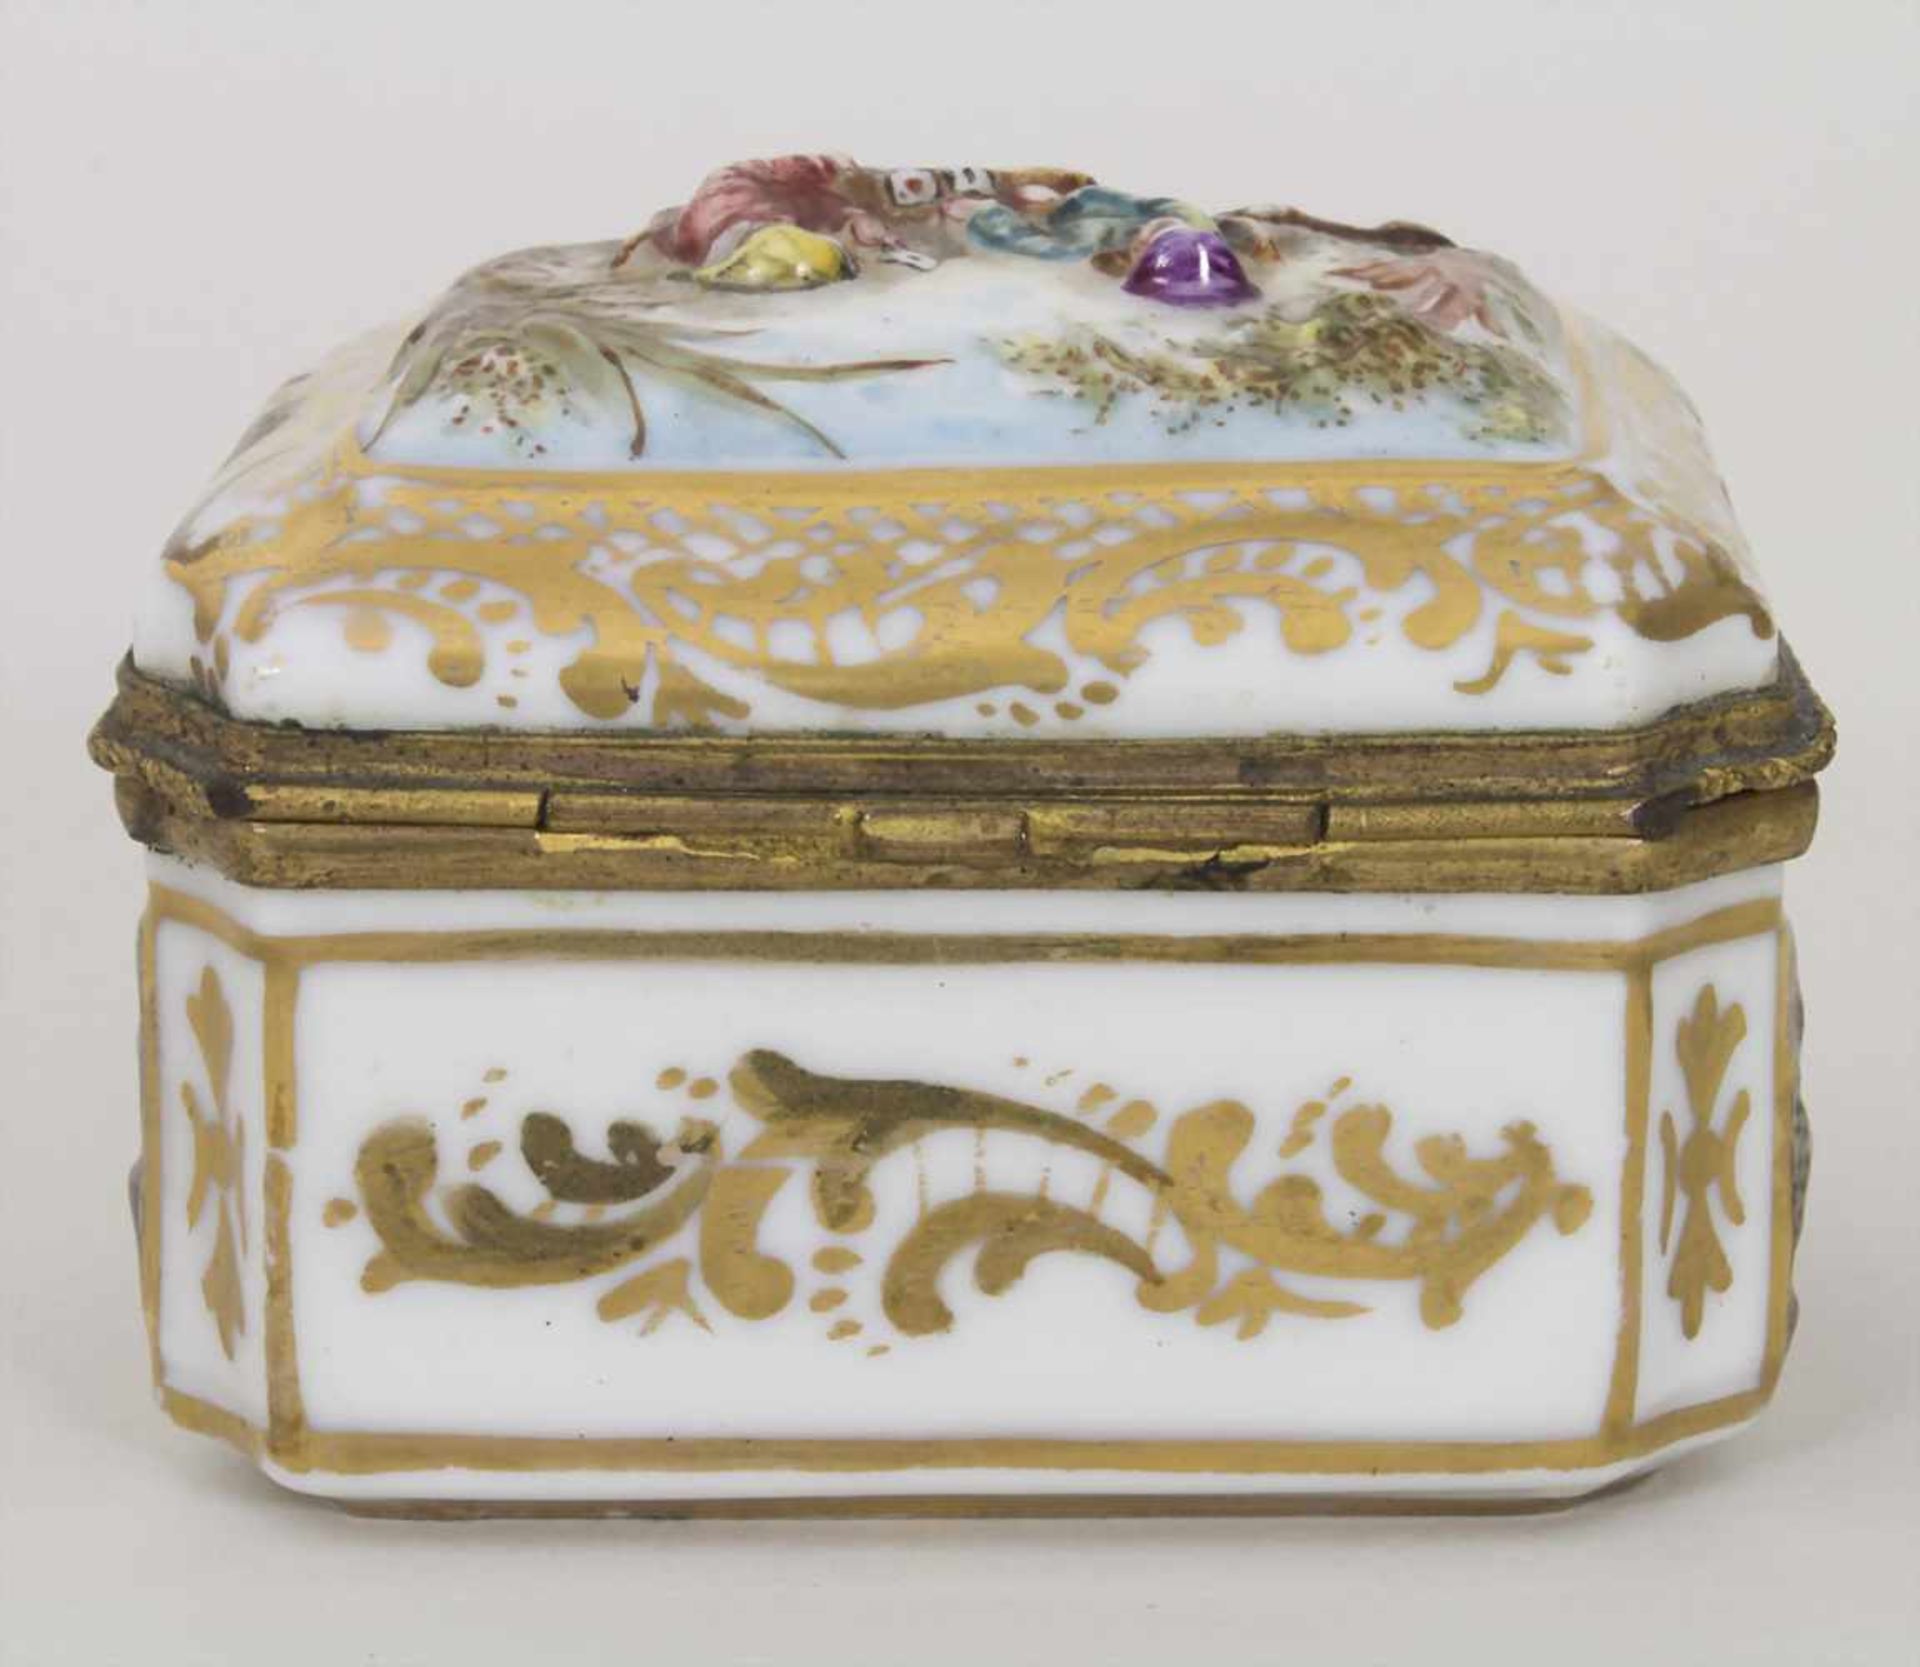 Deckeldose / Tabatiere mit Kartenspielern und Jagdszenen / A snuff box with card players and hunting - Image 3 of 8